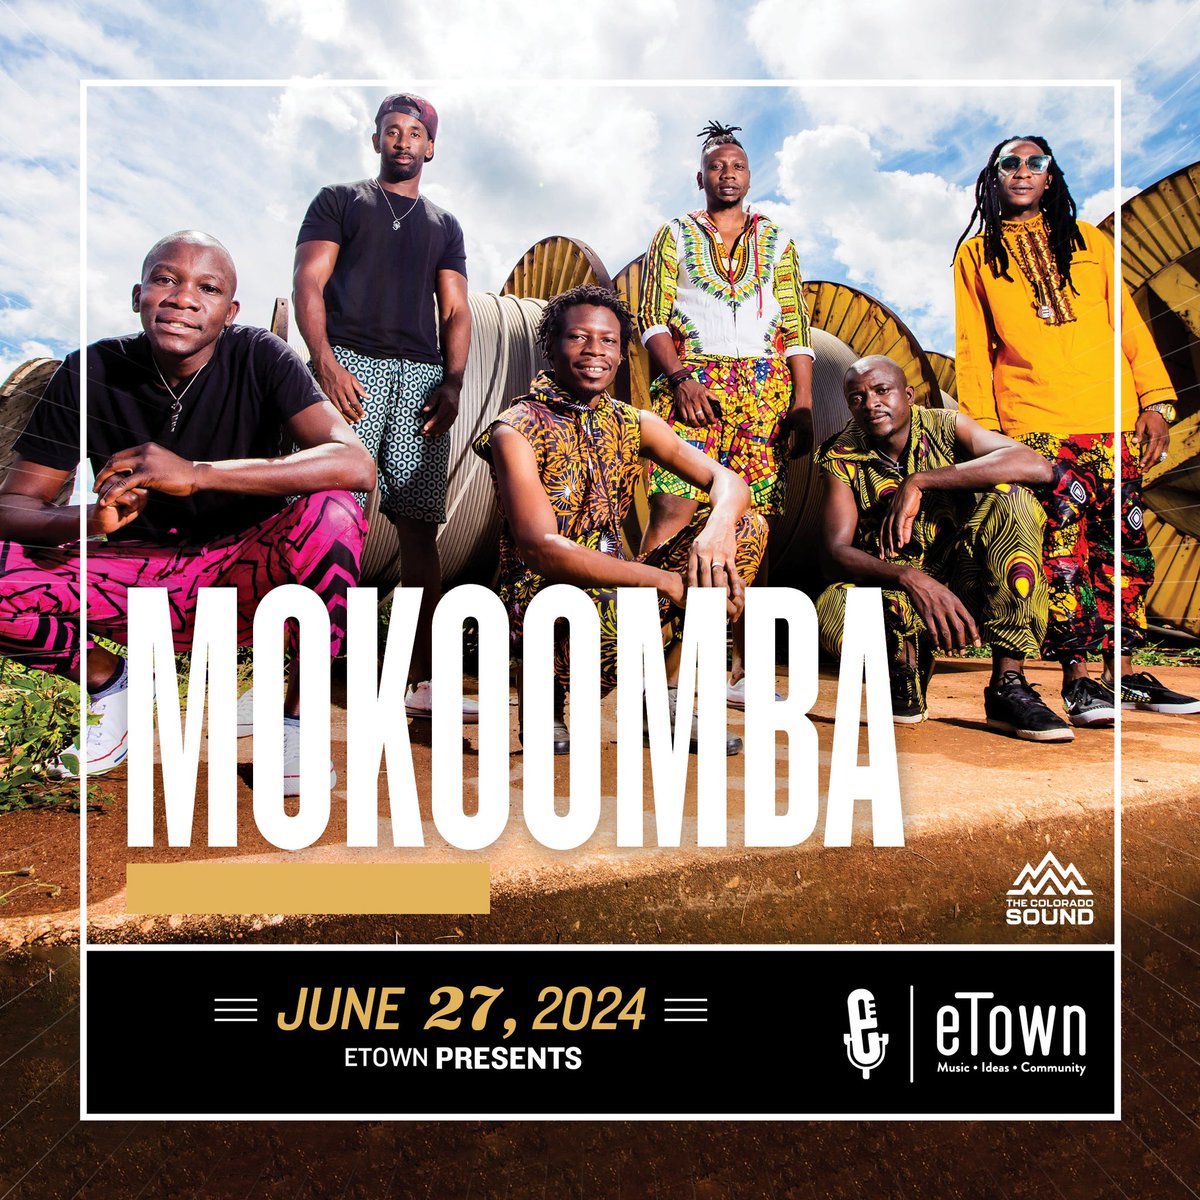 🚨Just Added🚨 We’re excited to welcome one of Africa’s most exciting young bands @Mokoomba to eTown Hall on June 27th for an evening of music! Tickets: eventbrite.com/e/an-evening-w…